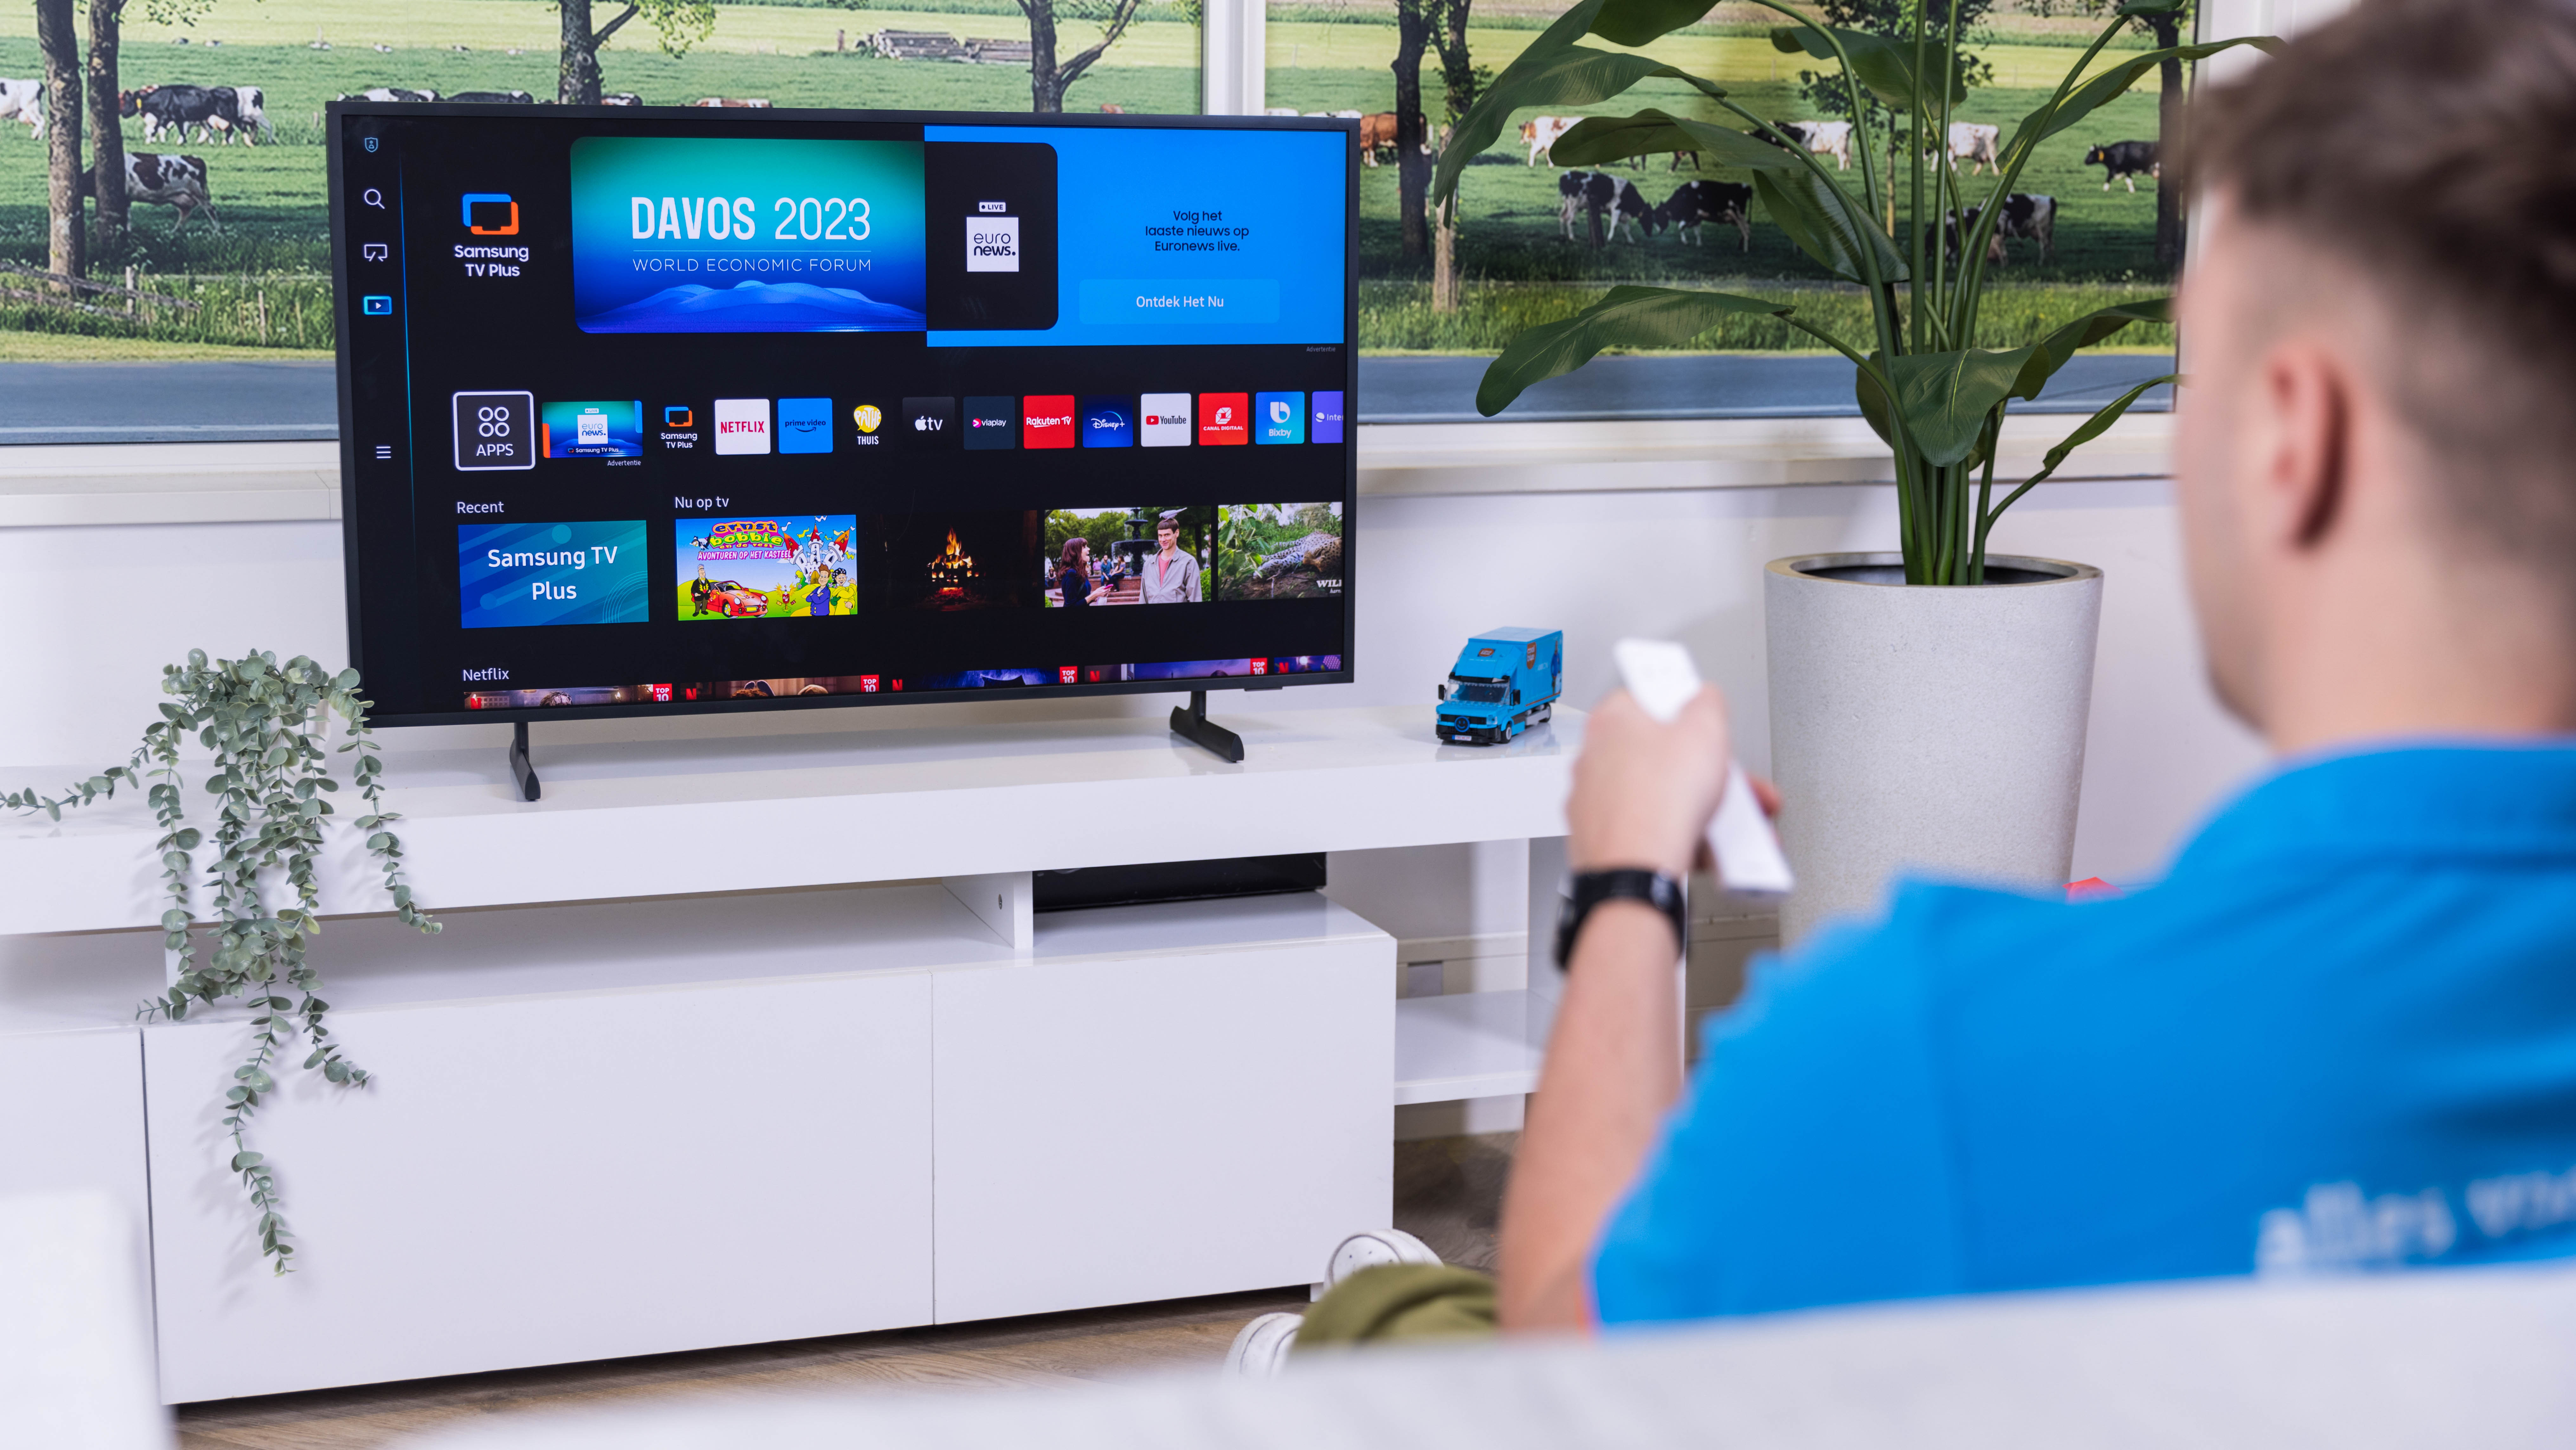 Samsung Smart TVs to Launch iTunes Movies & TV Shows and Support